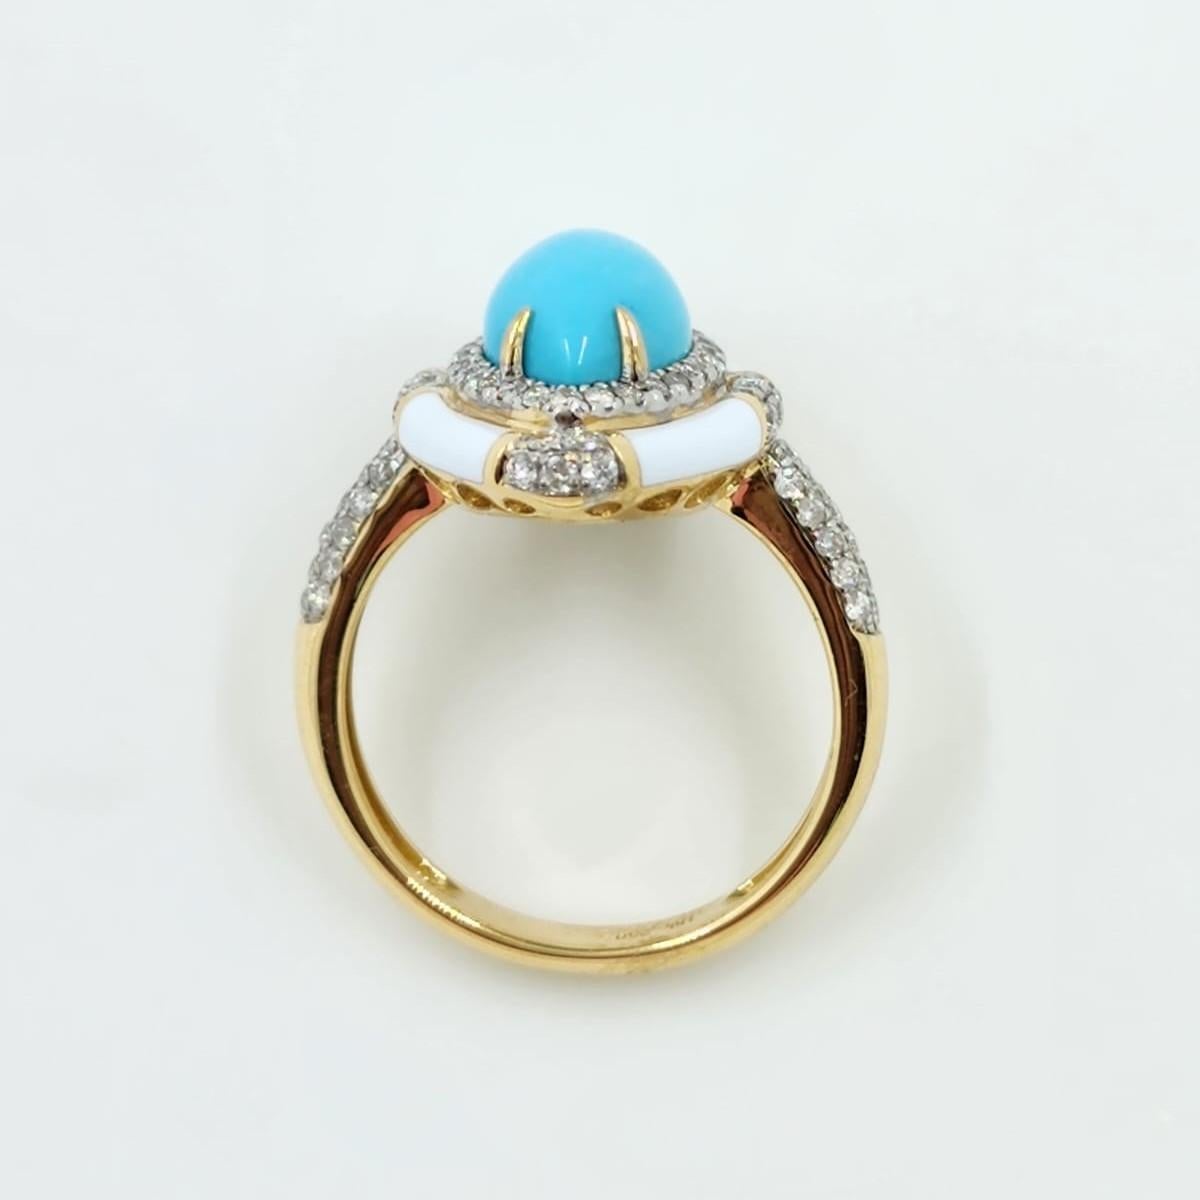 Marquise Cut 2.08 Carat Sleeping Beauty Turquoise Diamond Ring in 18 Karat Yellow Gold For Sale